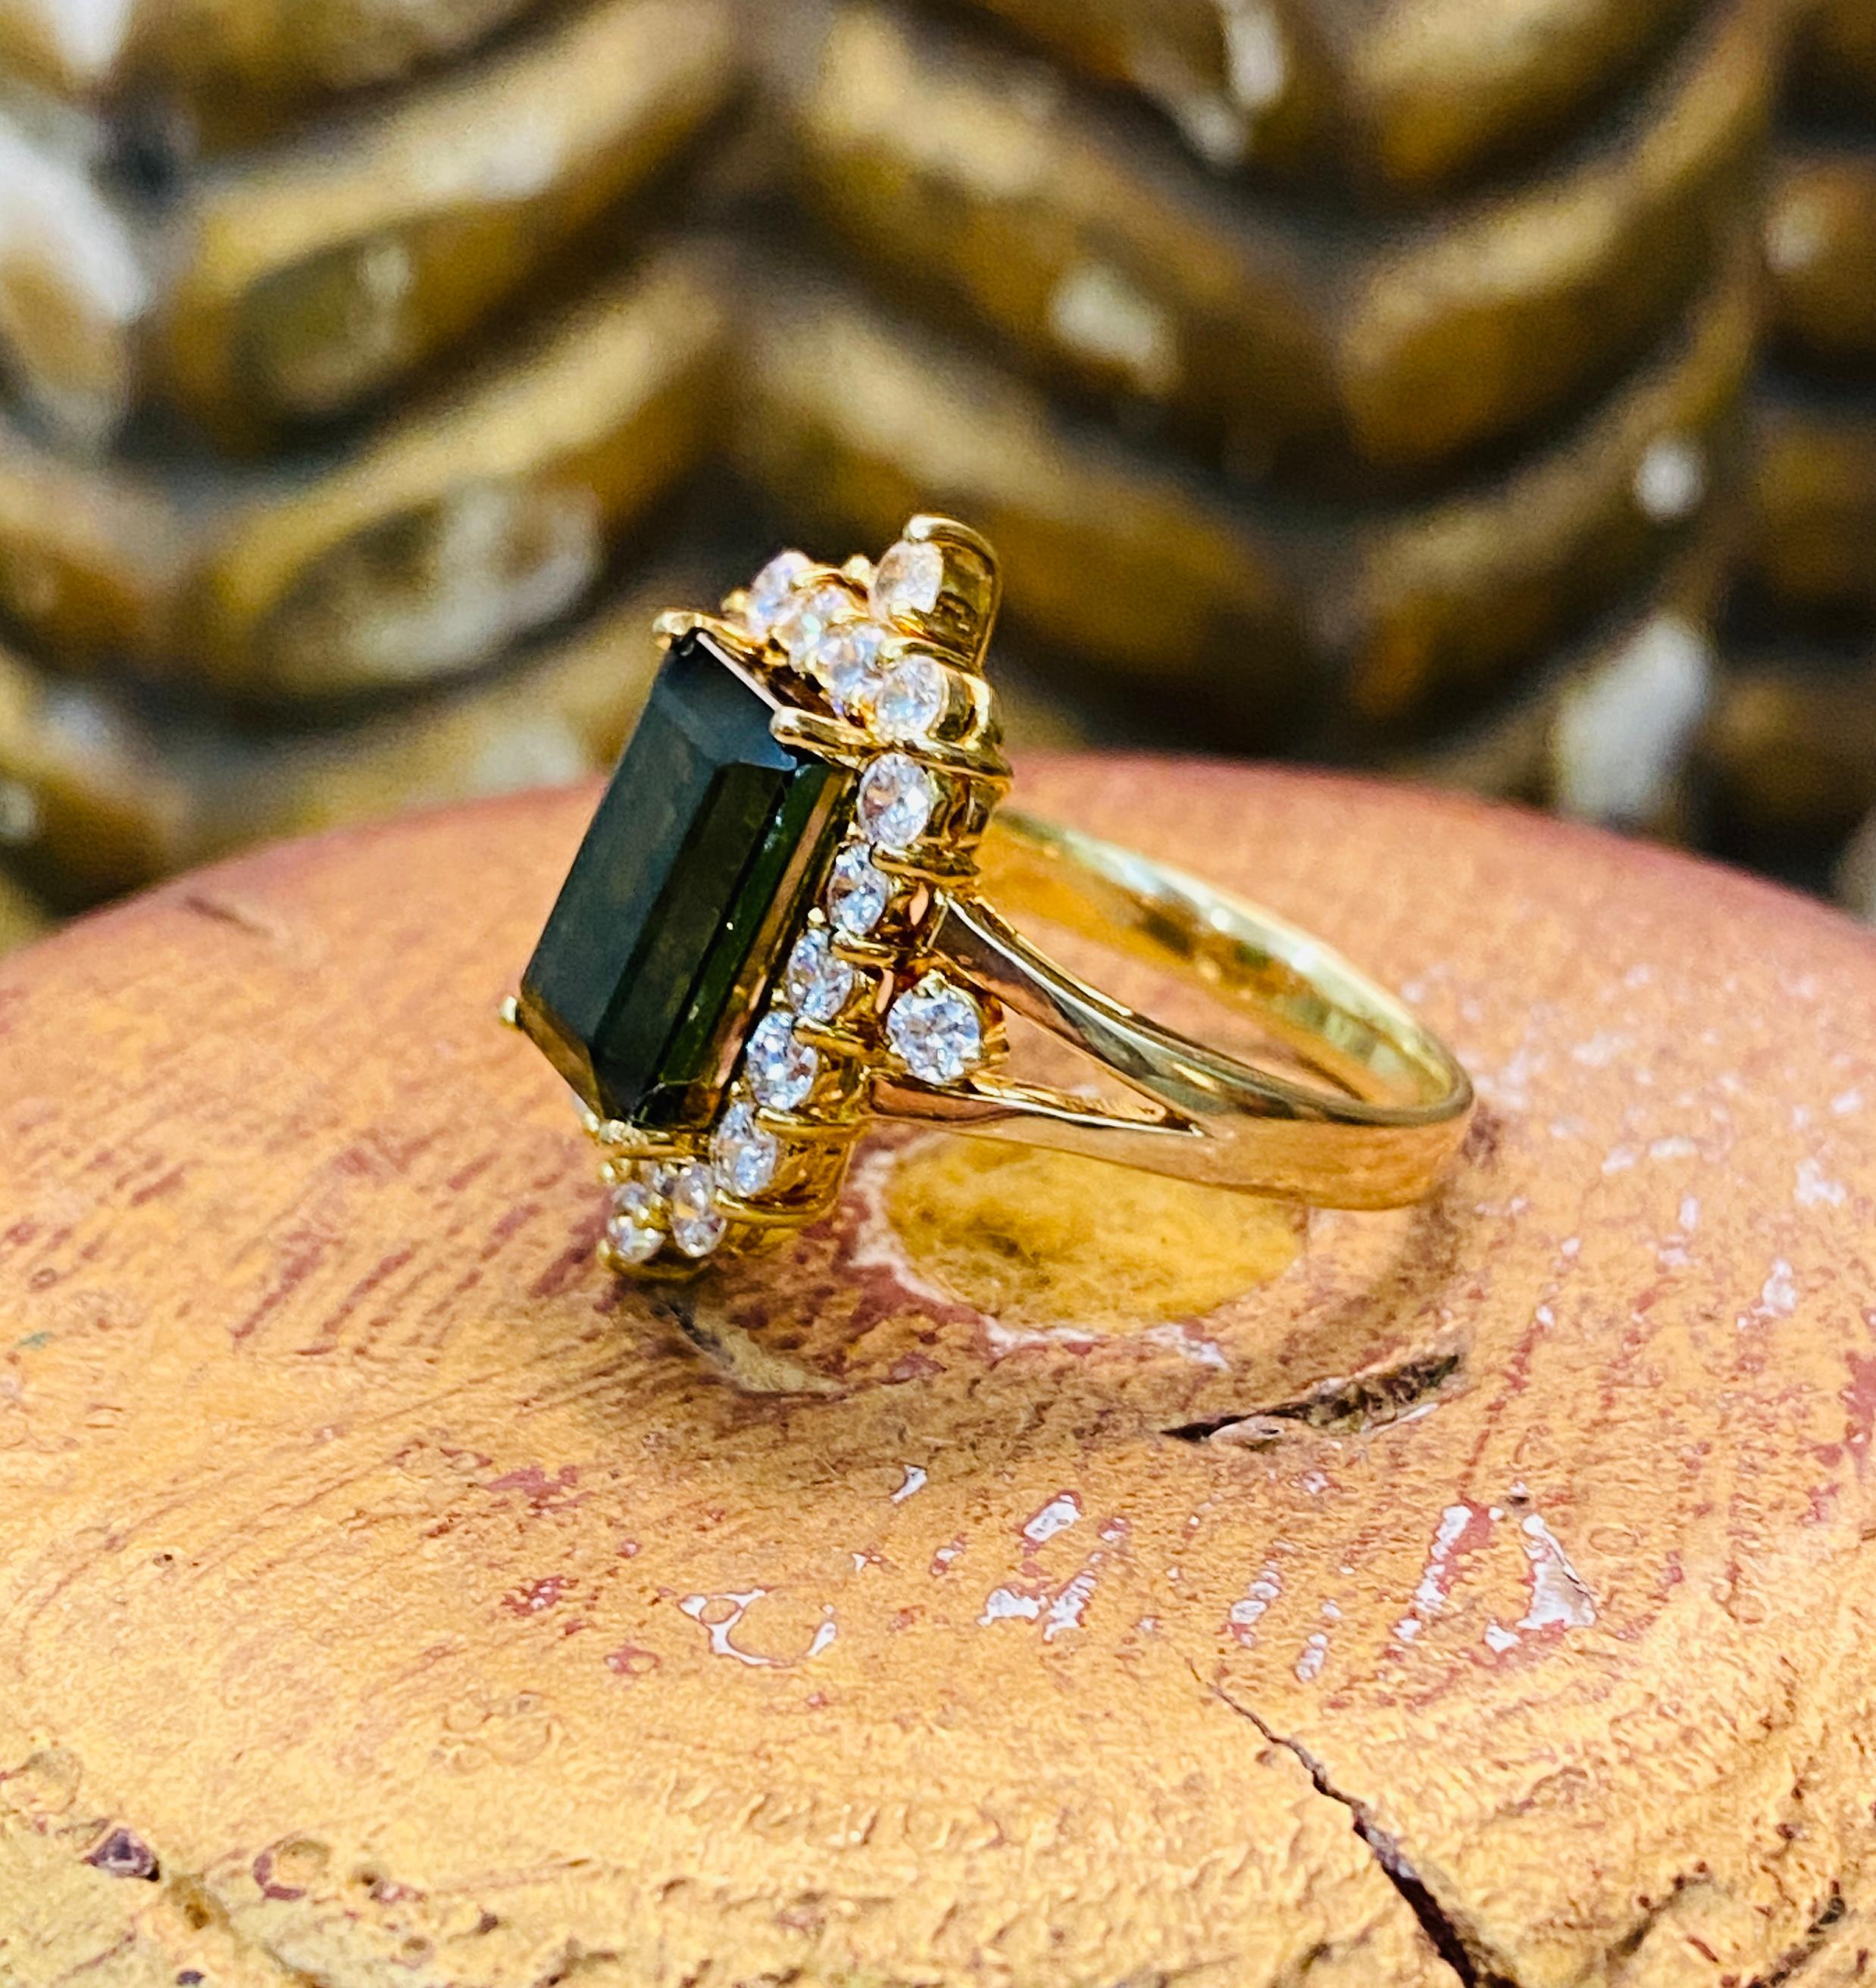 14k yellow gold 3.25 carat green tourmaline with 1.32 carat total weight G Vs round brilliant diamonds. 5Dwt. Size 8.75 US